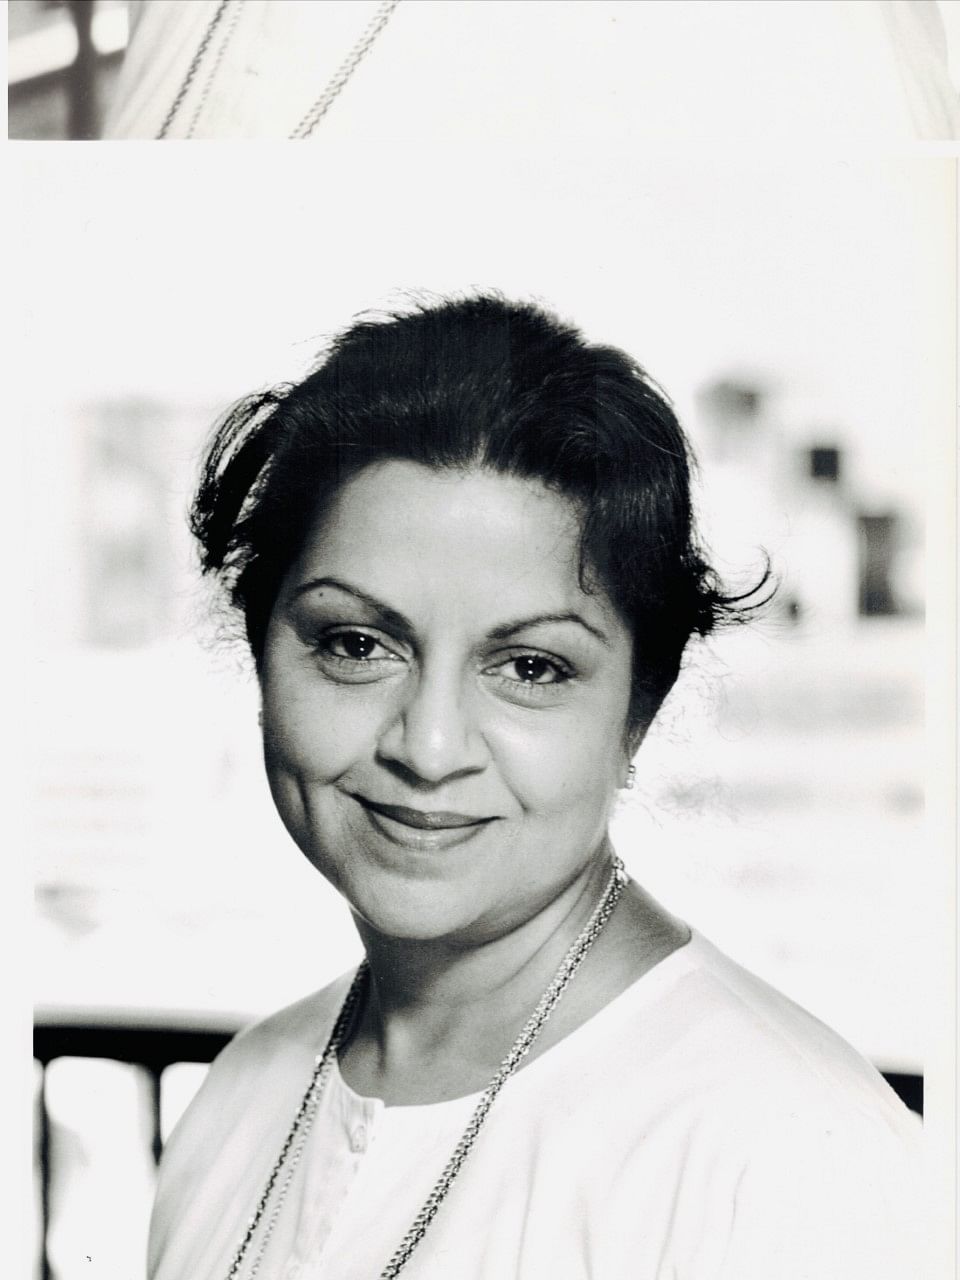 She was the first Indian woman chef in charge of a fine-dining restaurant, not only in US but in the entire world.